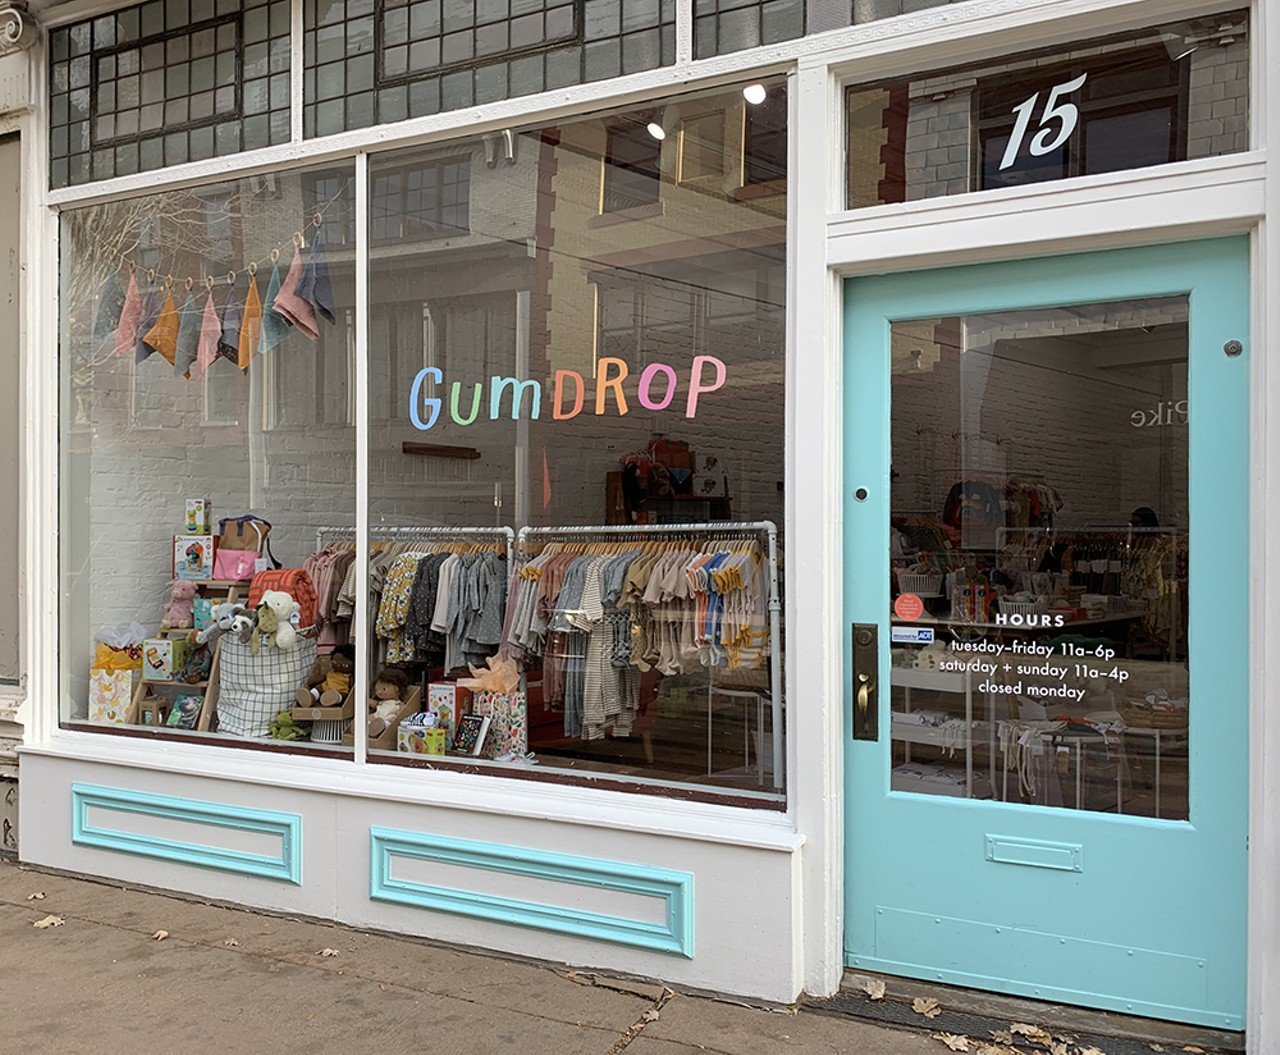 Gumdrop
15 W. Pike St., Covington; 326 W. Fourth St., Downtown
This bright and colorful kids shop from the minds behind Handzy has all sorts of goodies. From school supplies and sleepwear to the best new toys and most adorable clothes and accessories for toddlers and newborns, there is cuteness tucked in every corner. 
Photo: facebook.com/gumdroptots